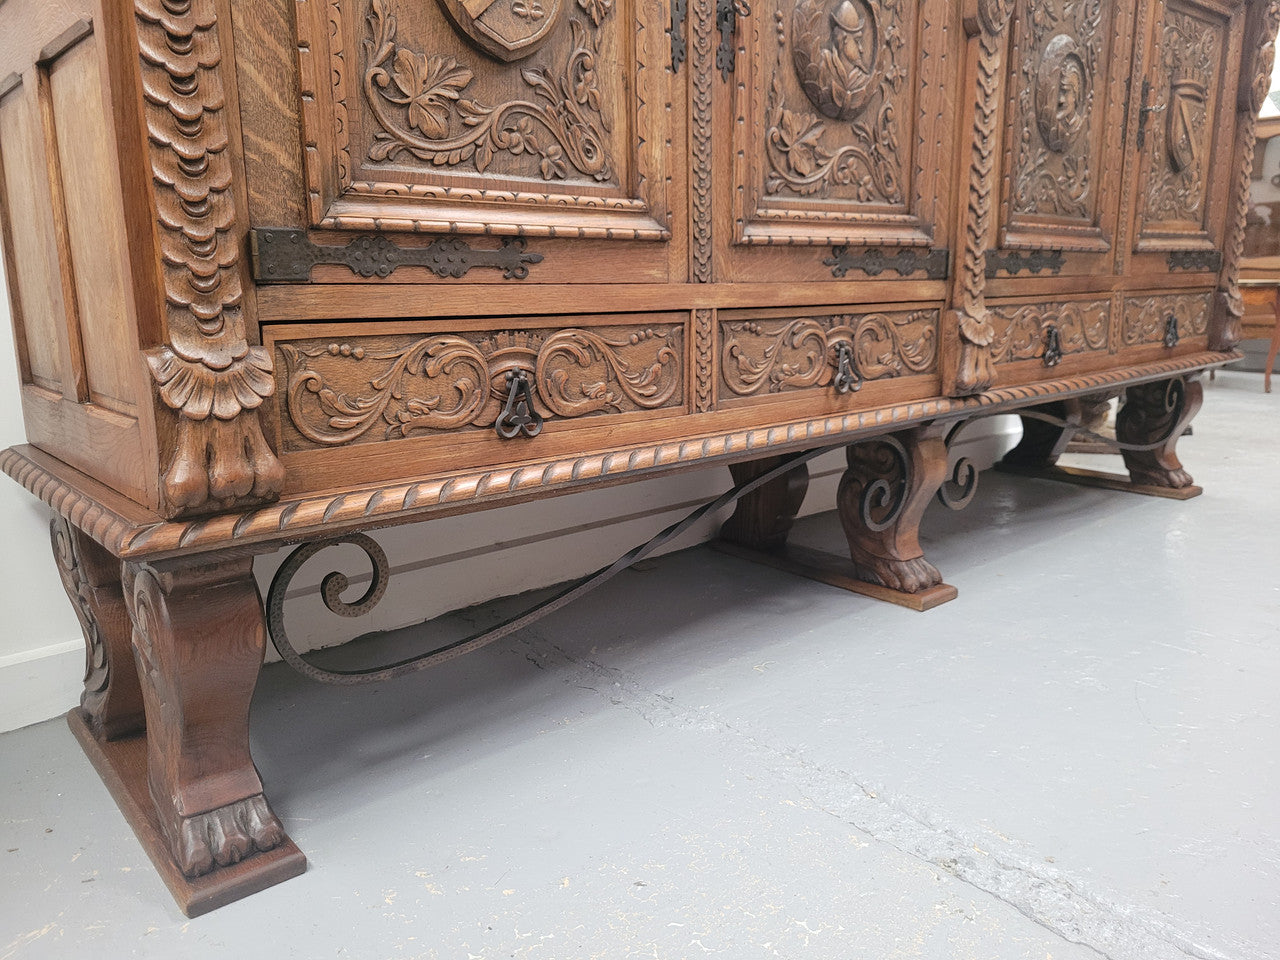 Large French Oak Renaissance style four door sideboard/buffet. Great decorative item with amazing carvings and stunning iron work on base. It is in good original detailed condition. Can pull apart completely making it easier to move.